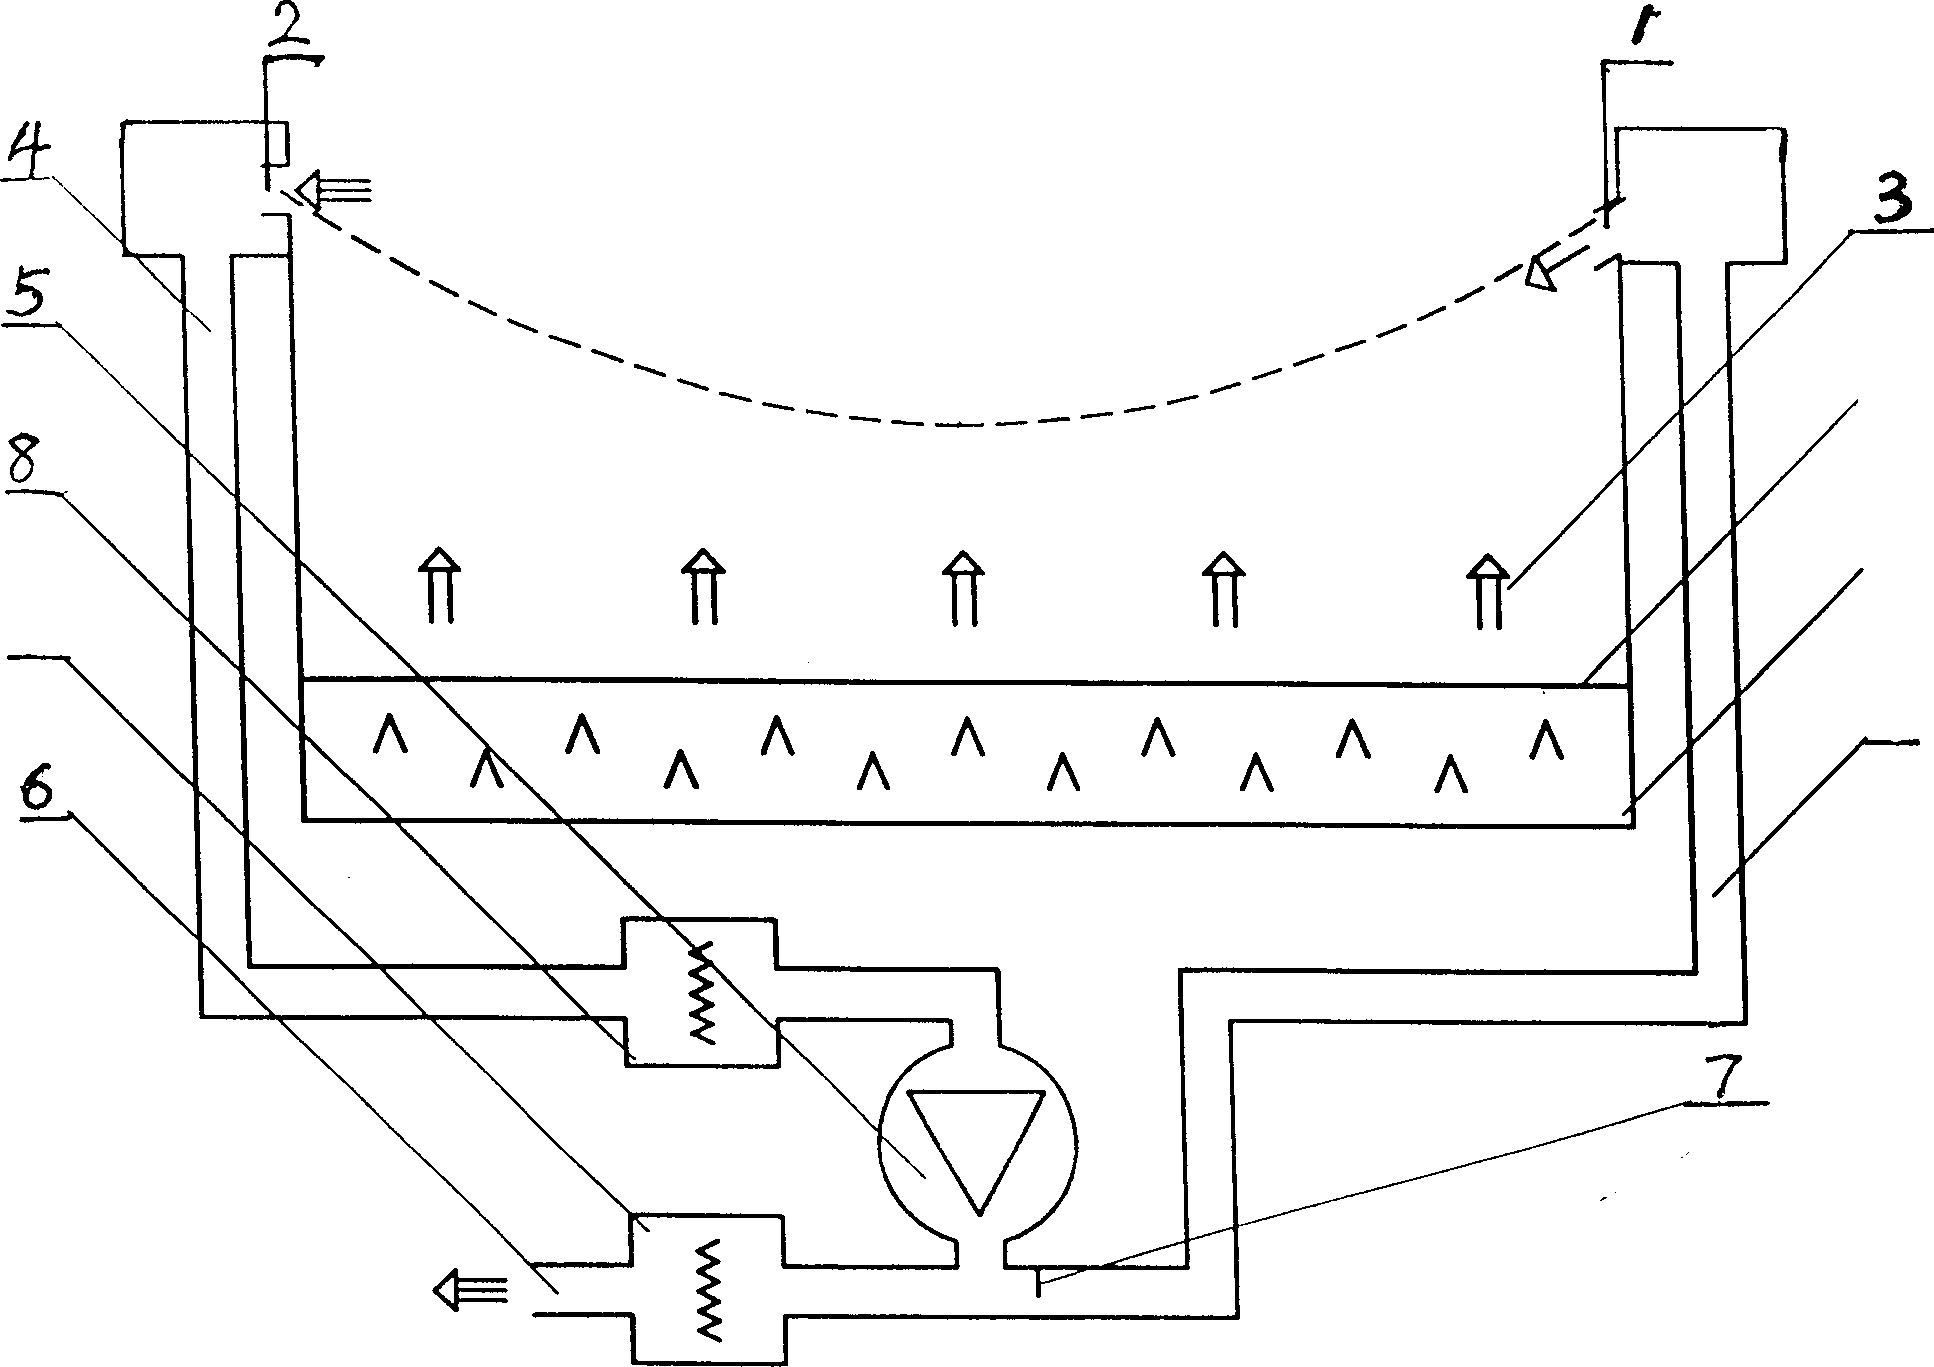 Fluid envelope surface type apparatus for shielding, separating and exhausting powdered smoke dust